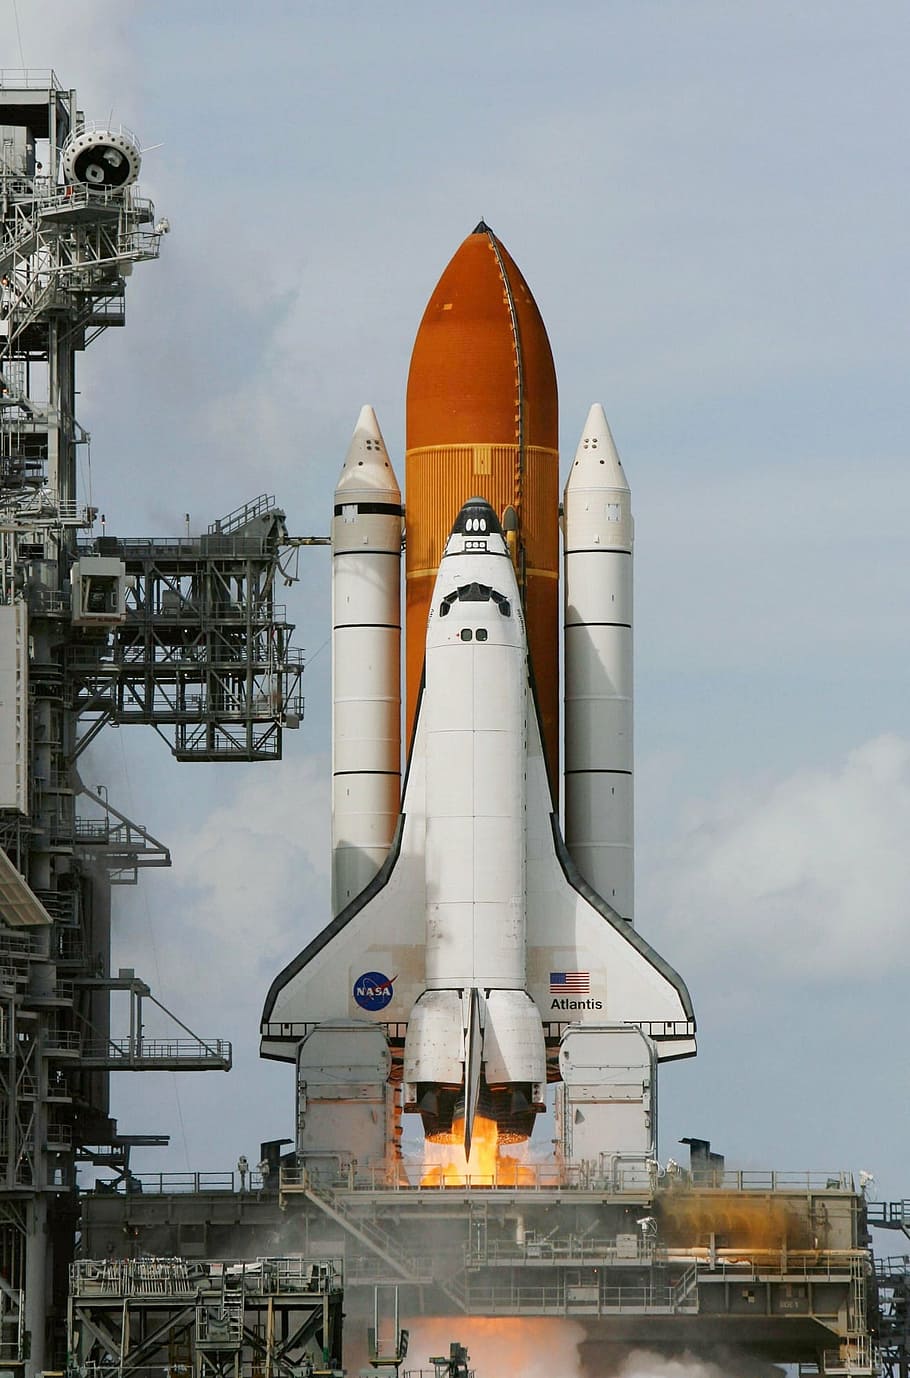 NASA space shuttle taking off from ground, space shuttle atlantis